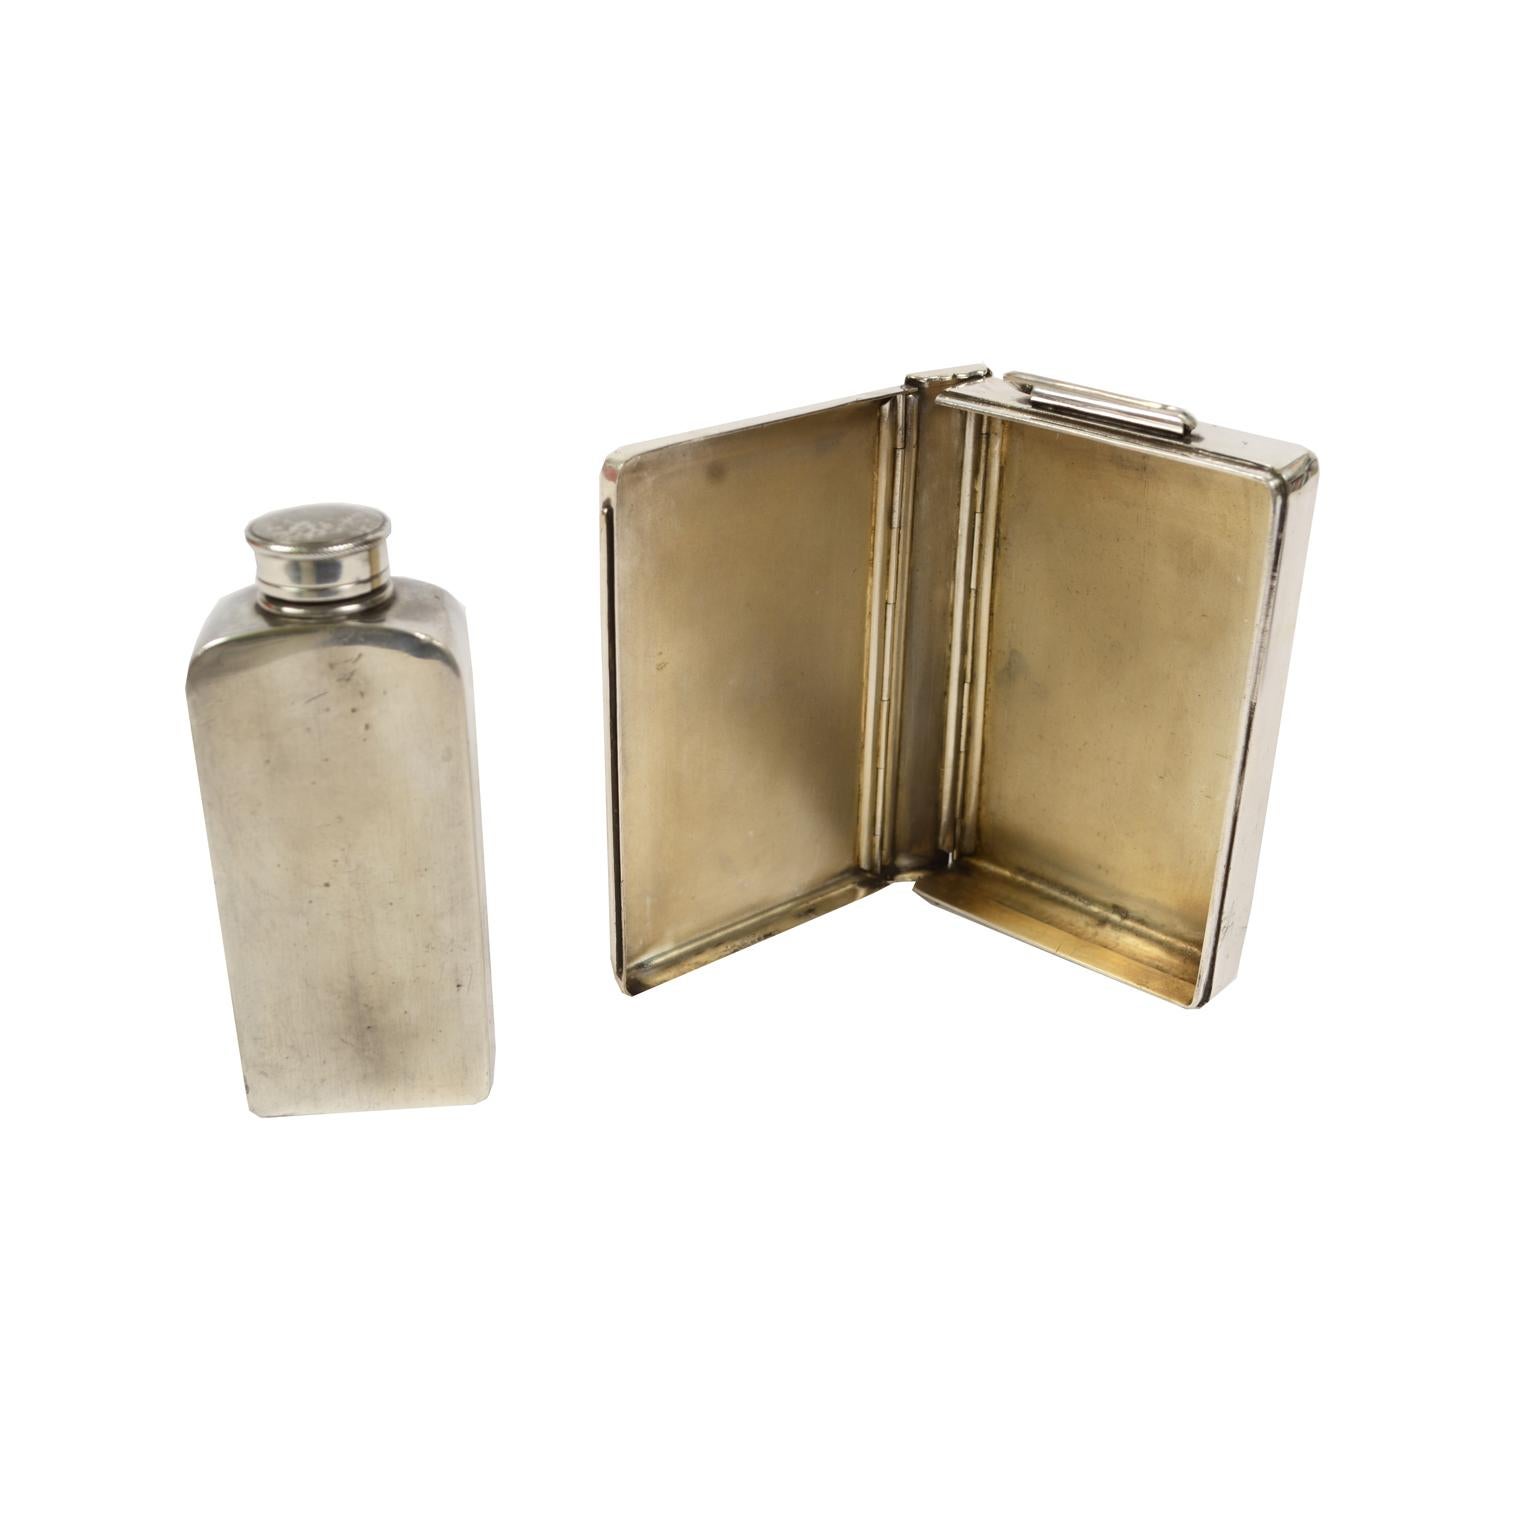 British Sandwich and Flask Holder Used During the Fox Hunting, circa 1890